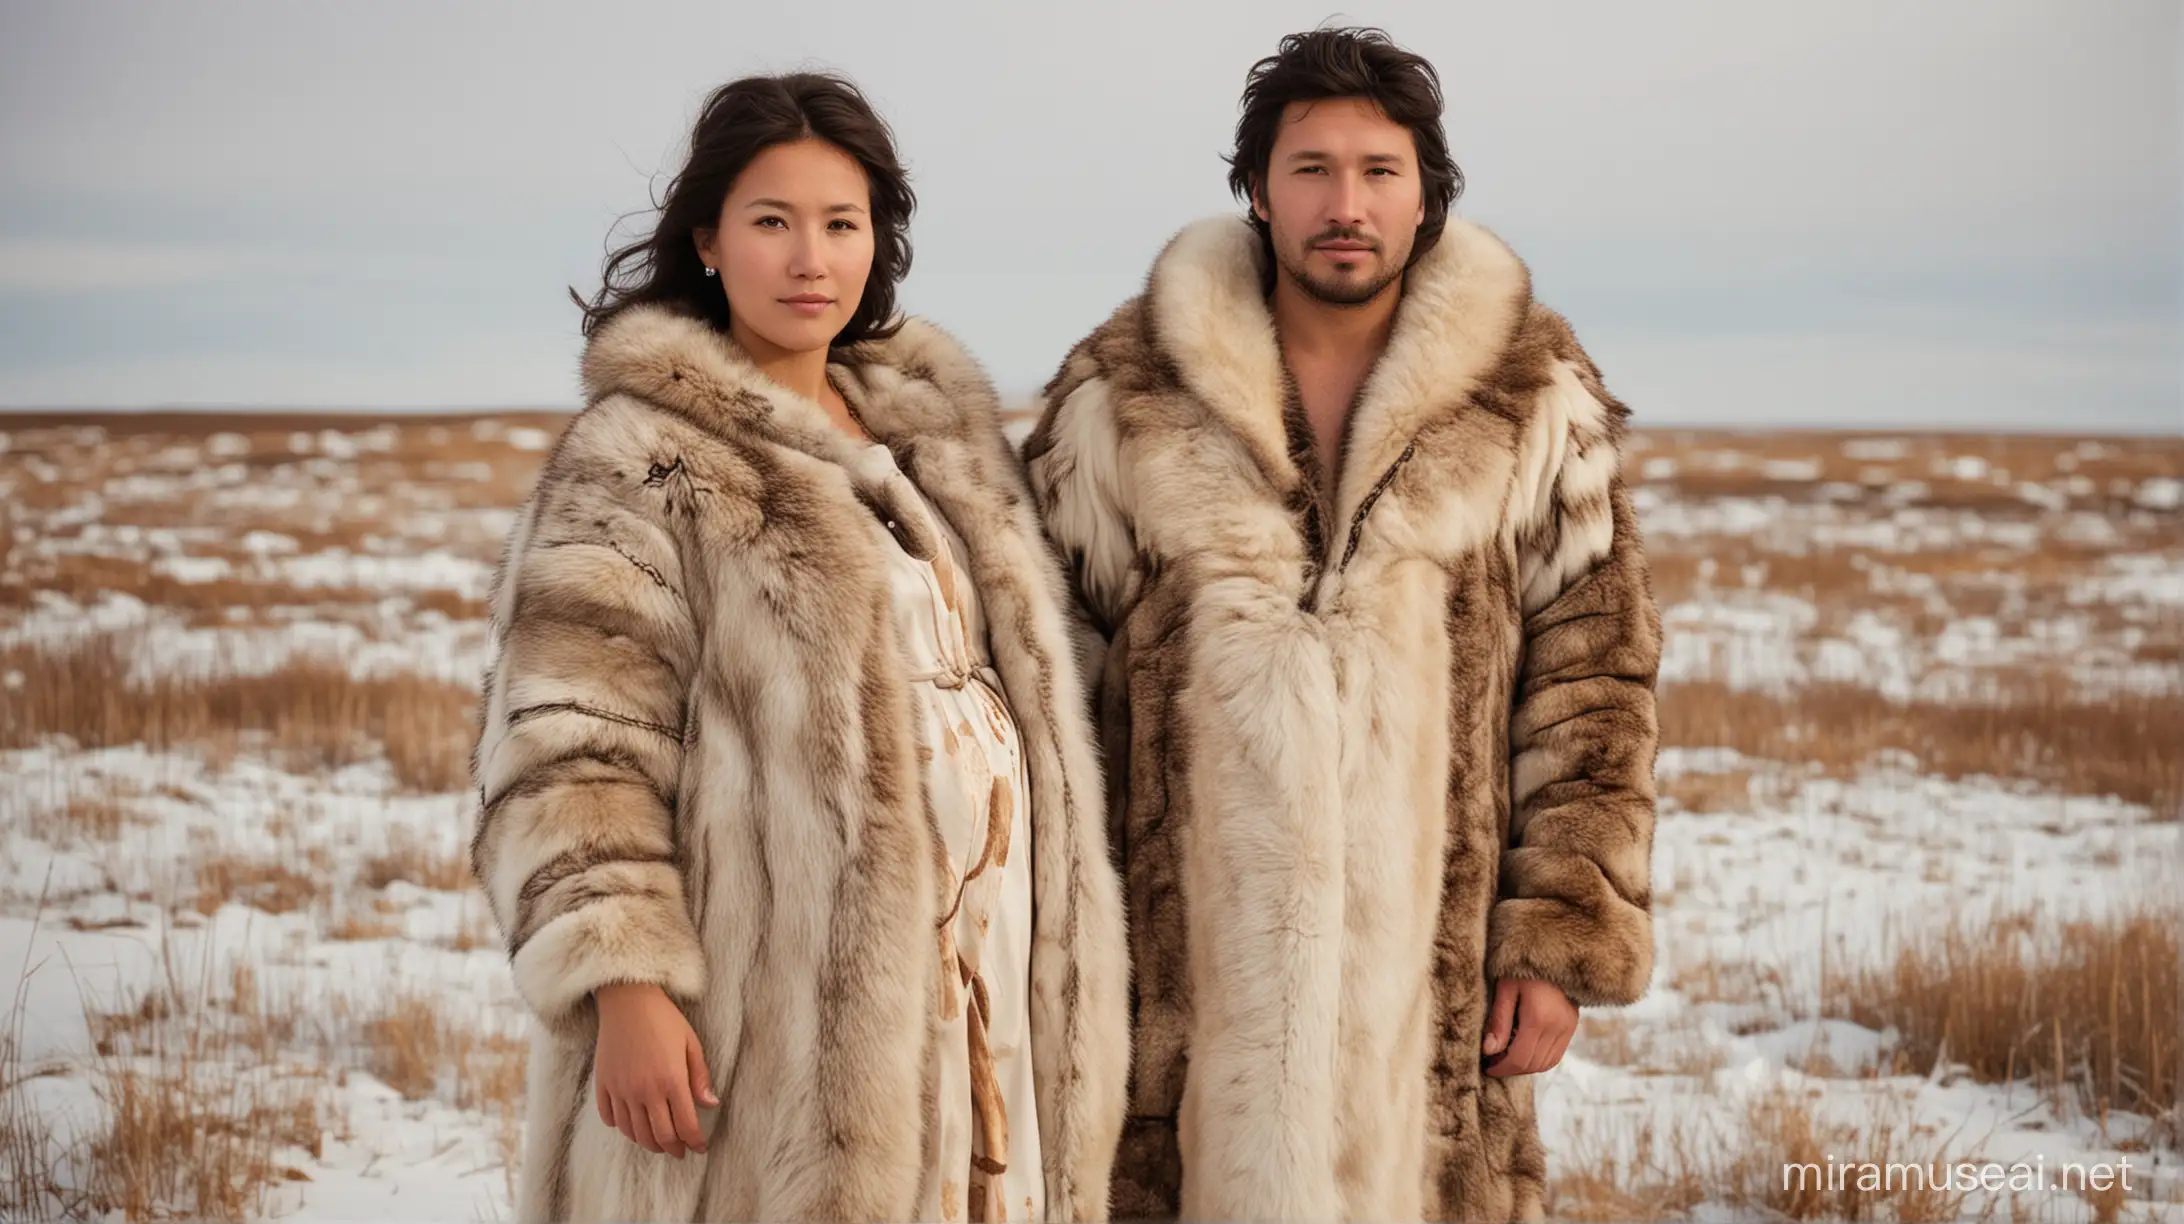 A photo of a woman with her husband. Eskimo with a dress made of animal skin. The woman in the picture is pregnant 
